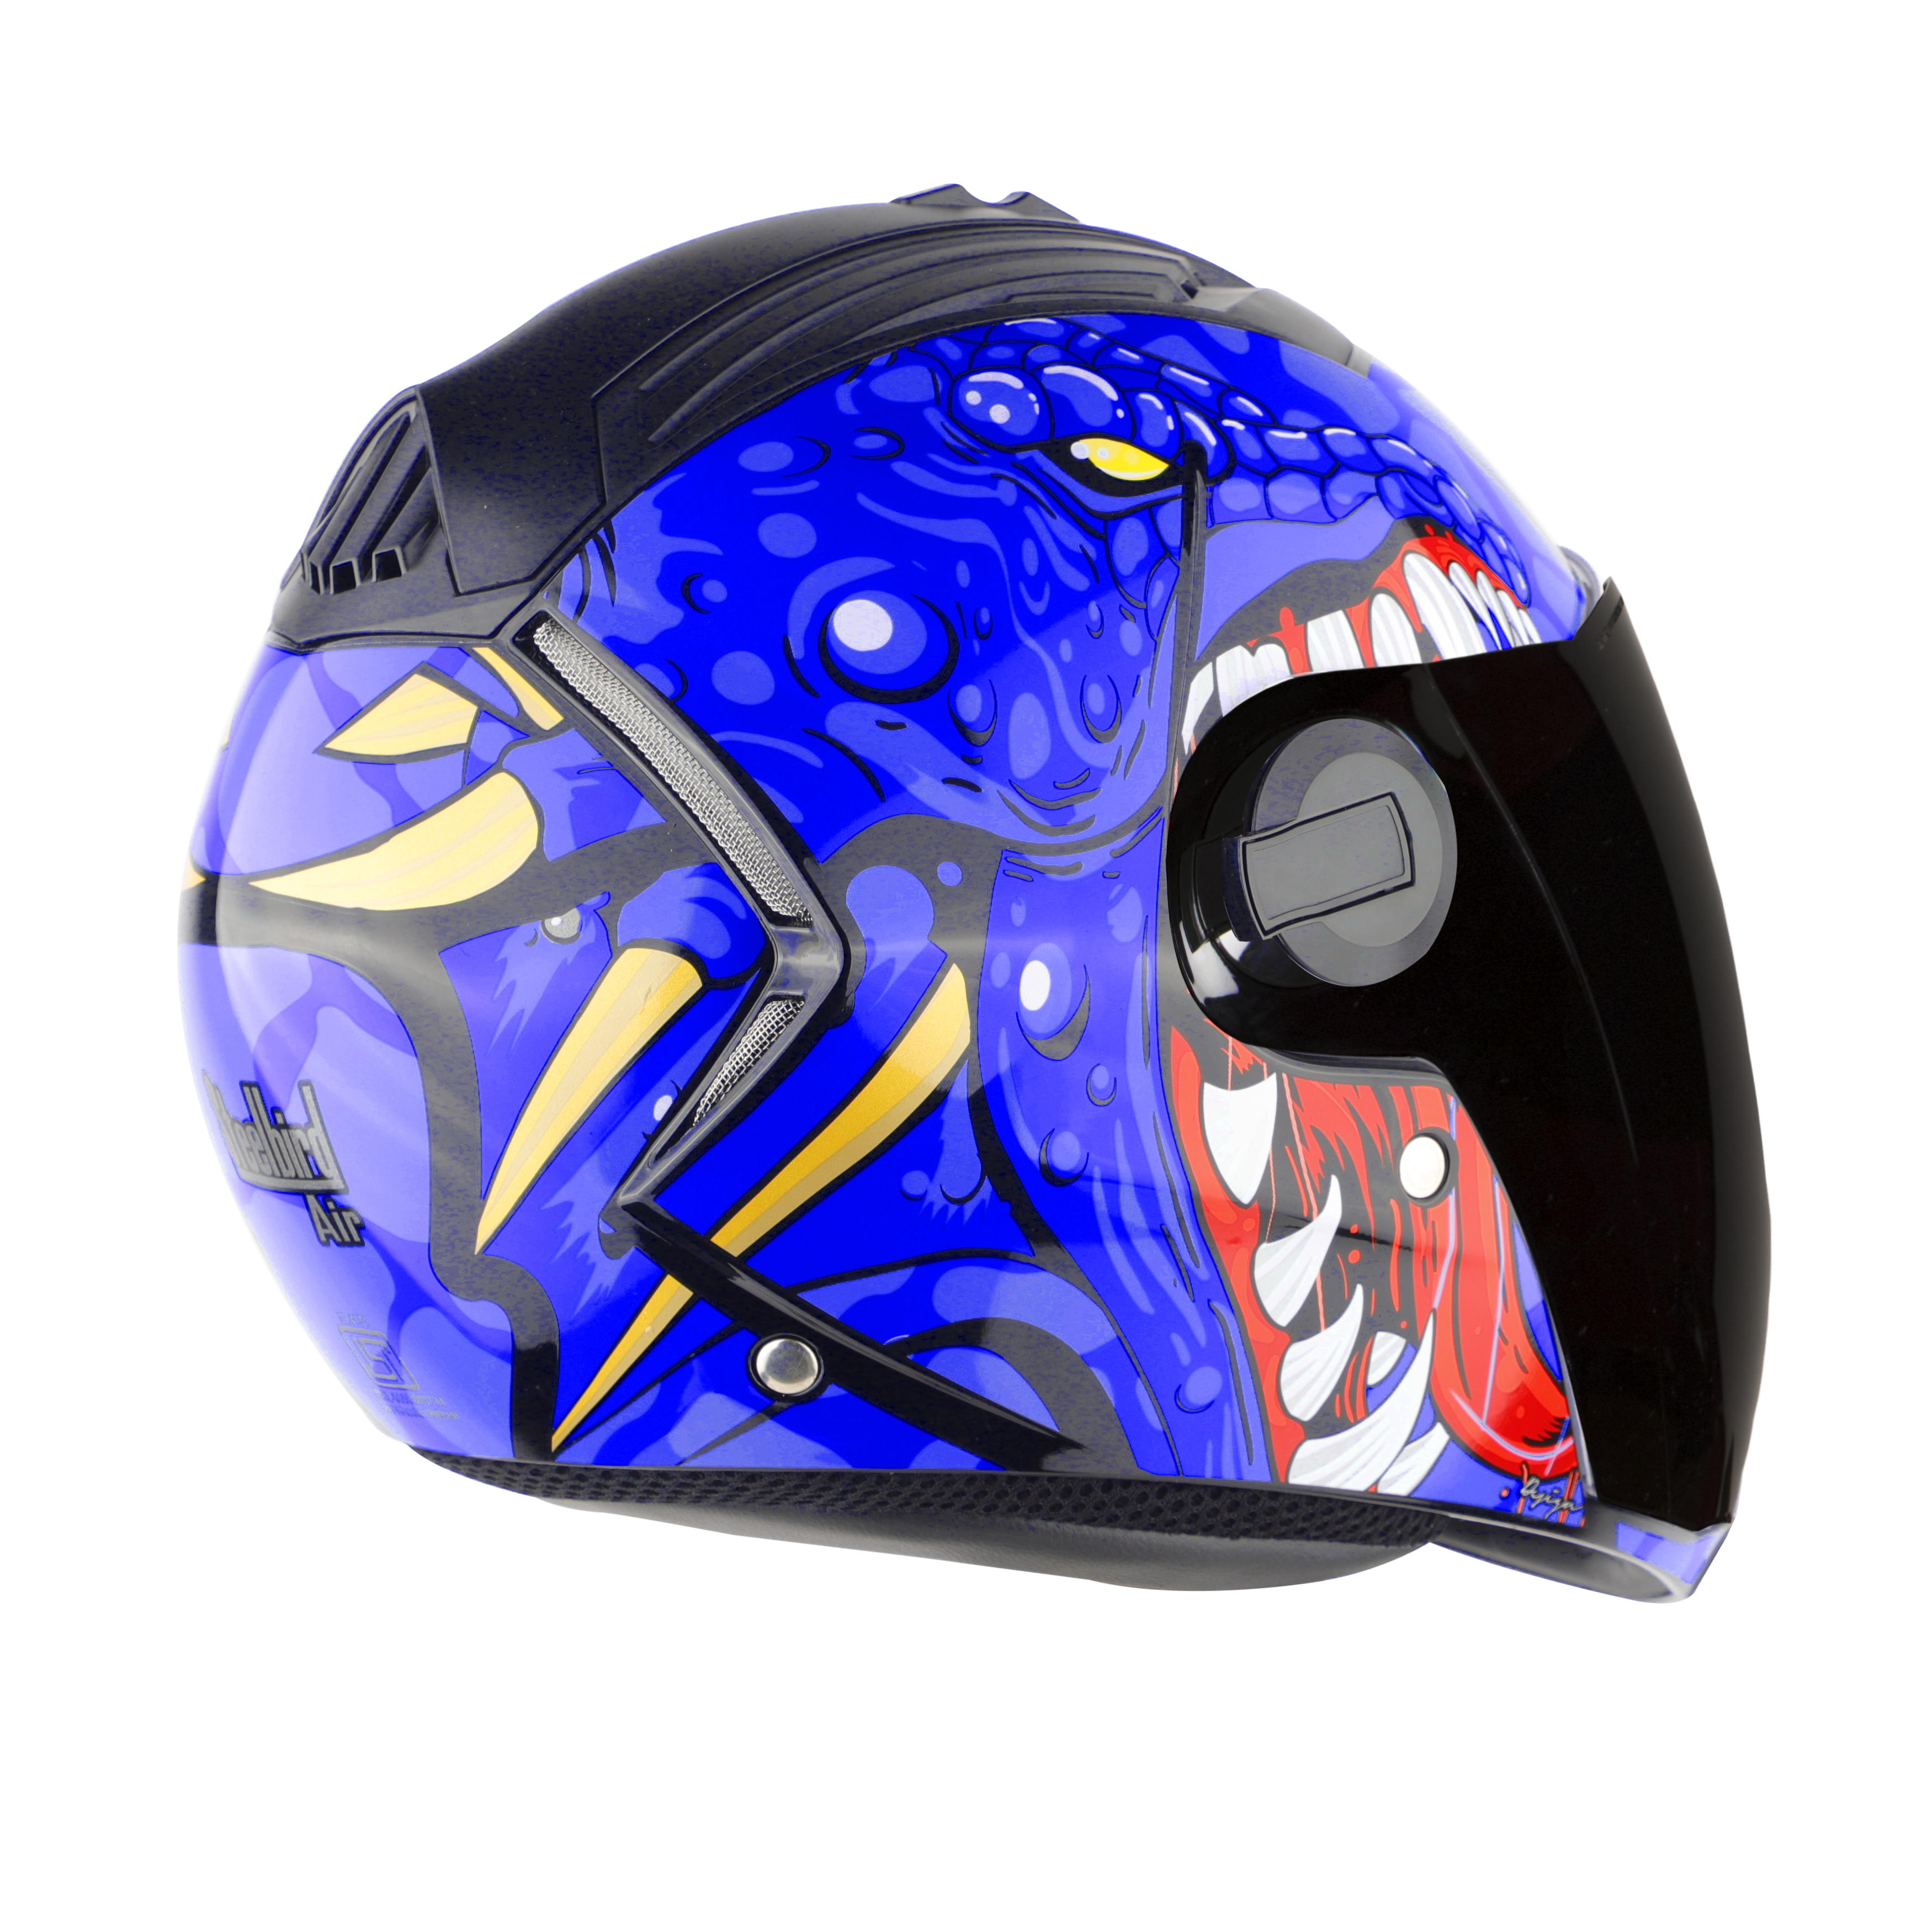 SBA-2 DRAGON MAT BLACK WITH BLUE (FITTED WITH CLEAR VISOR EXTRA SMOKE VISOR FREE)